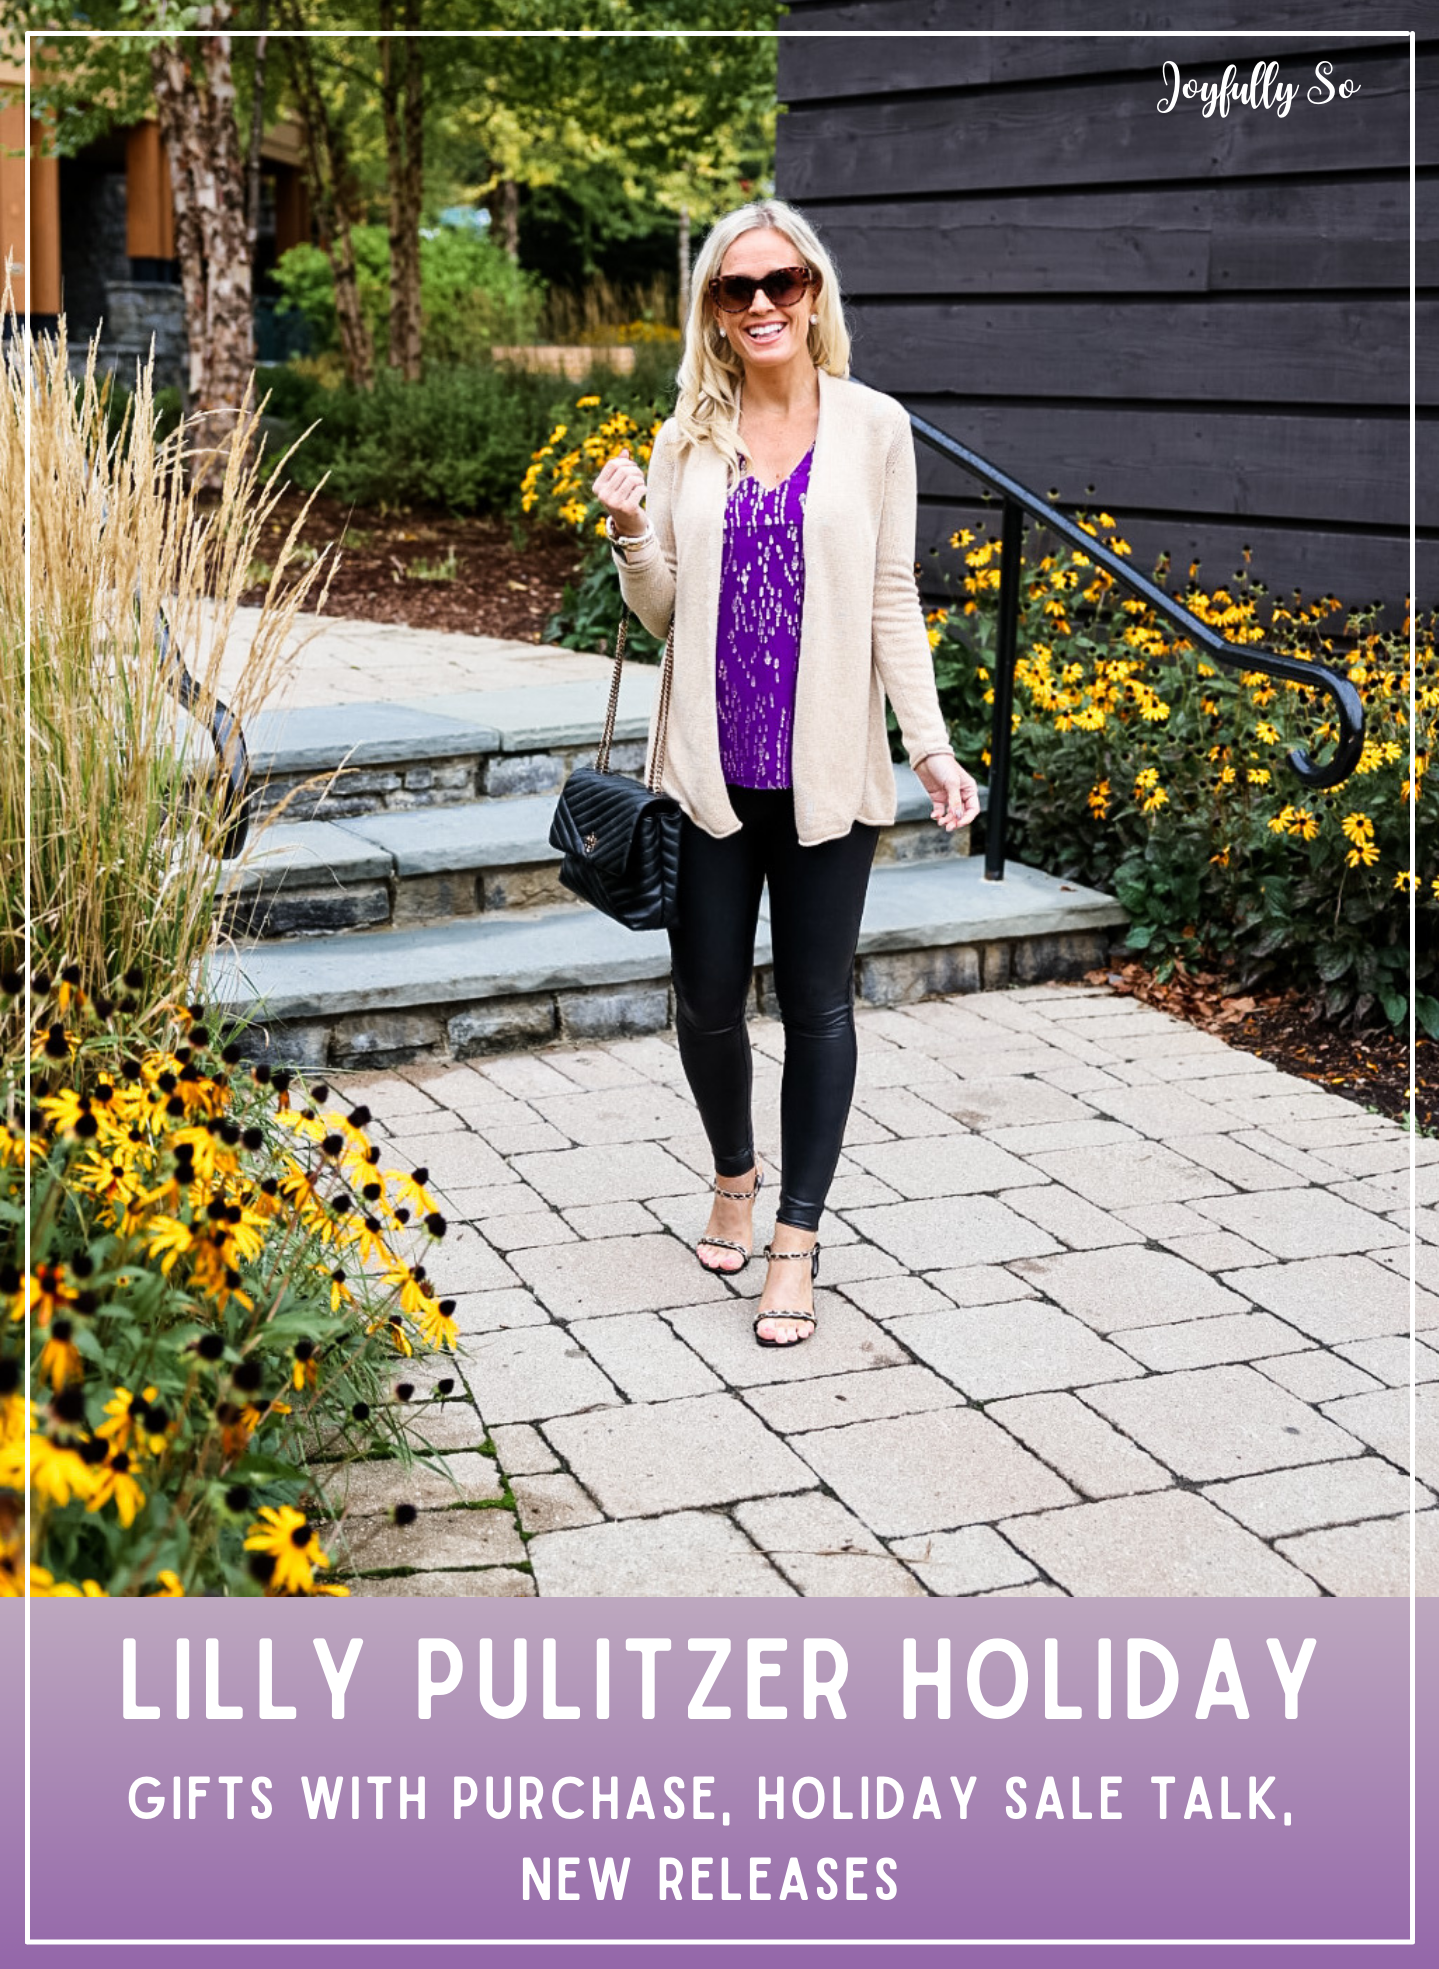 Lilly Pulitzer Holiday 2021 | Black Friday Lilly Pulitzer | Cyber Monday Lilly Pulitzer